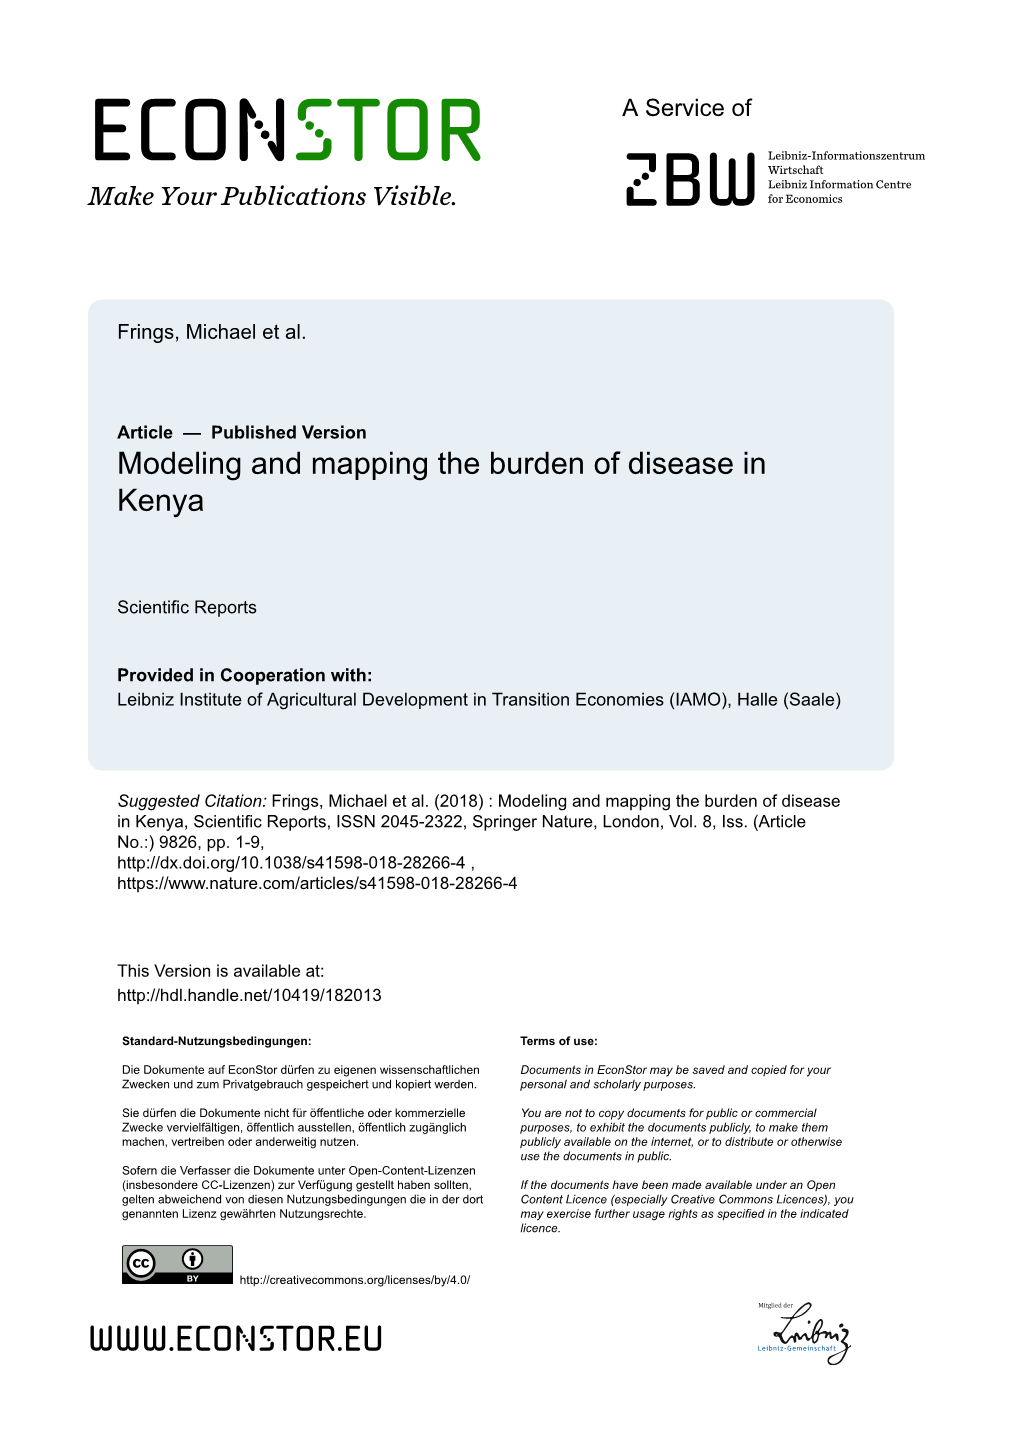 Modeling and Mapping the Burden of Disease in Kenya